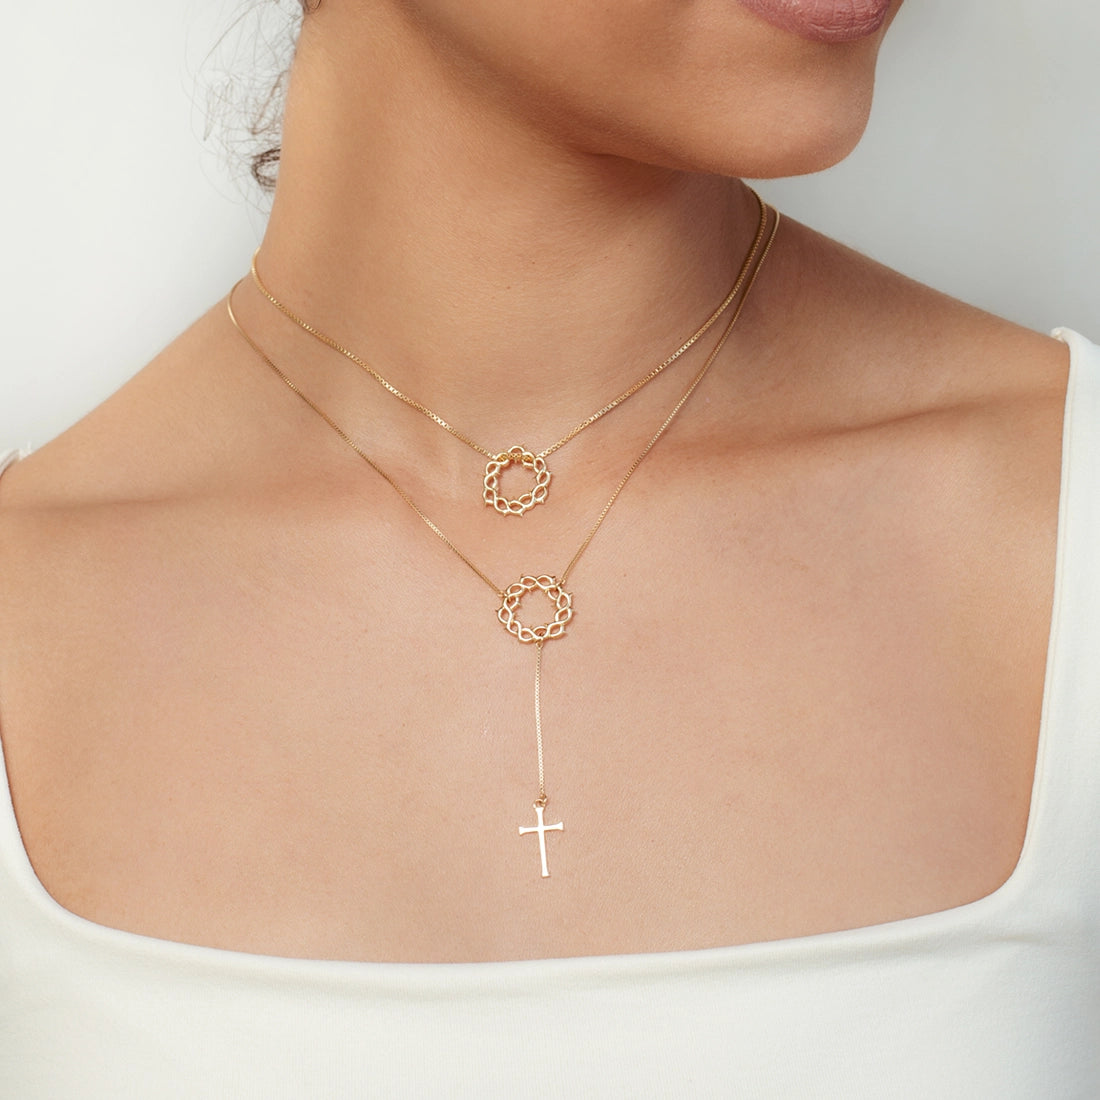 Christian woman wearing 2 Crown of Thorns Necklaces with a cross pendant in 18k gold vermeil from the Insignia Collection by Rizen Jewelry.